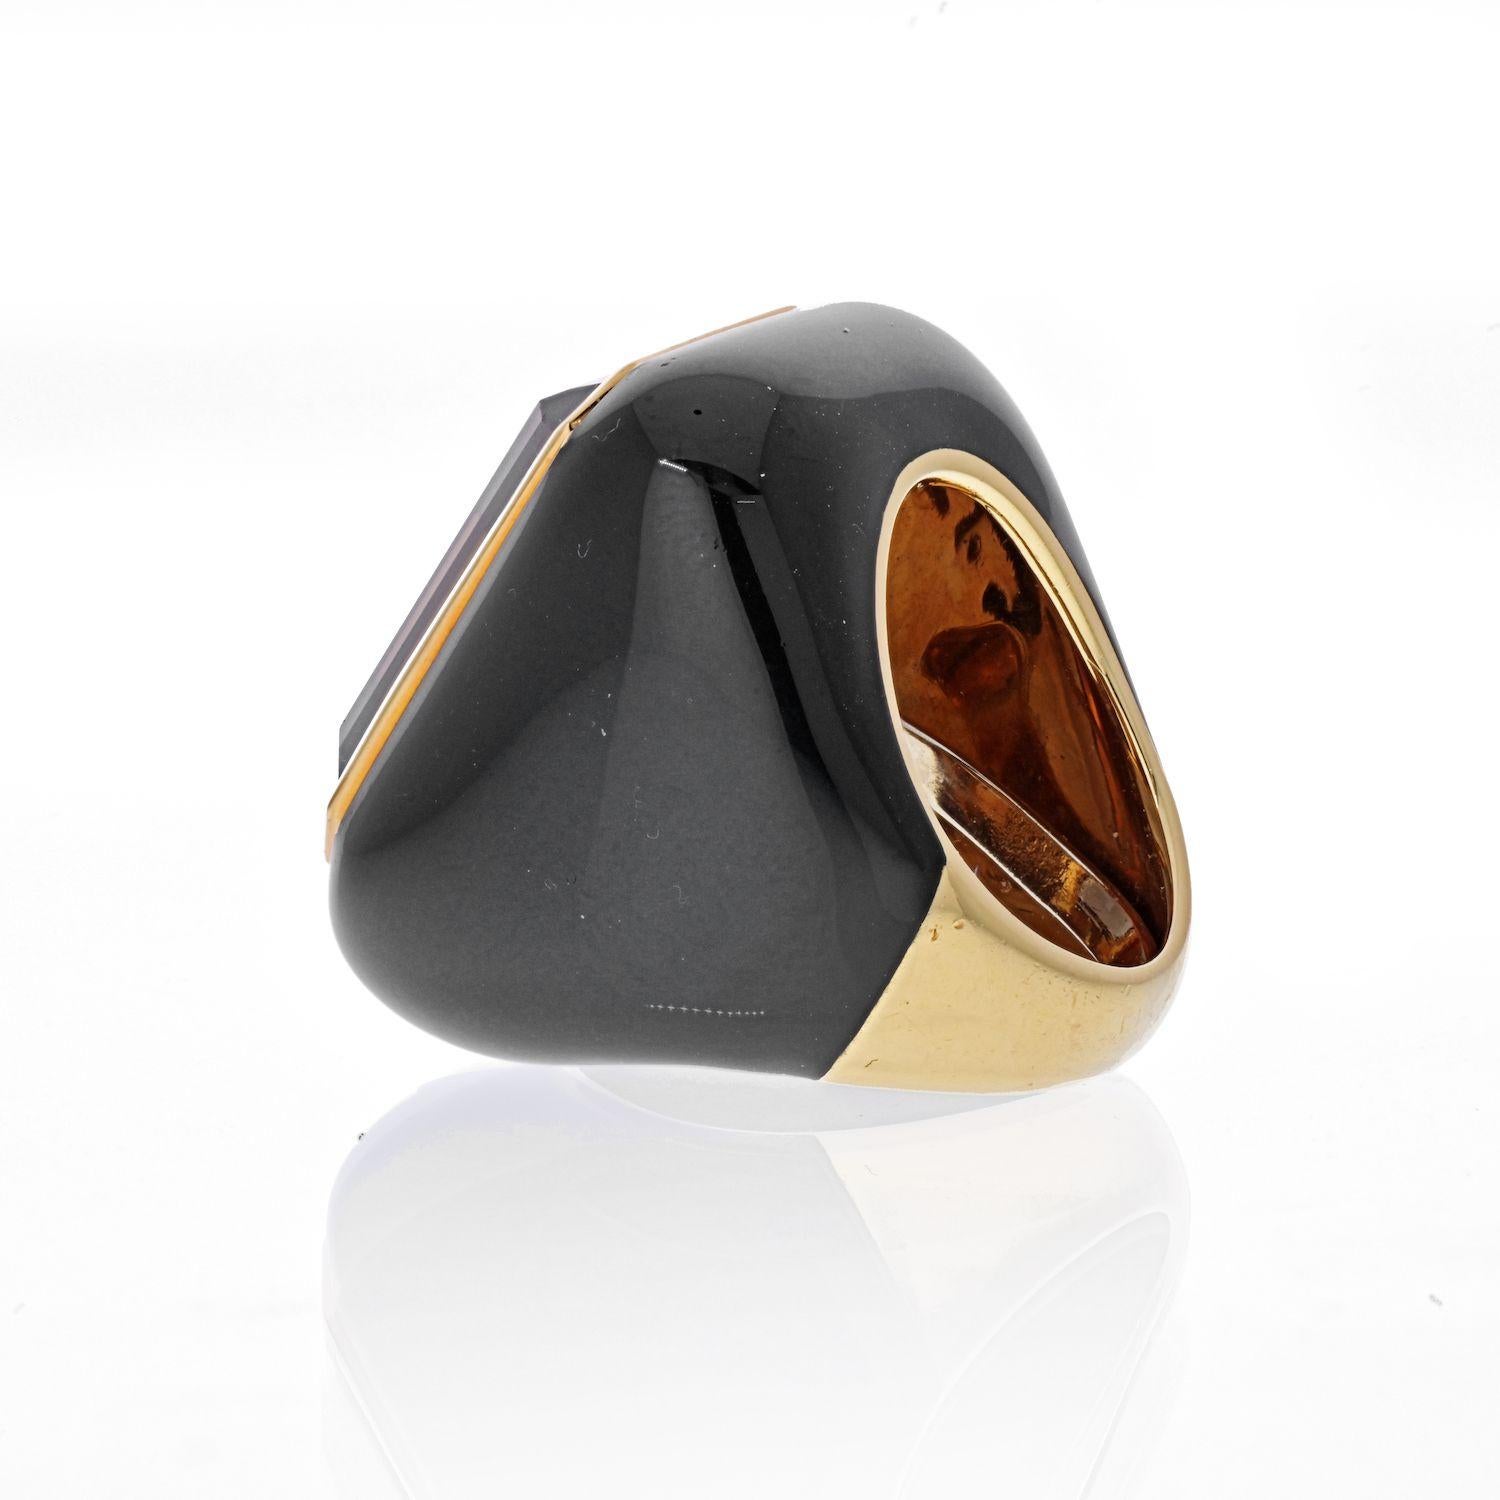 David Webb smoky quartz ring centering one emerald-cut smoky quartz ap. 20.00 cts., framed by polished gold, within a cushion-shaped mount of black enamel, signed Webb, ap. 17.2 dwts. gross. Size 5 1/2, with inner guard. With signed pouch.

Overall